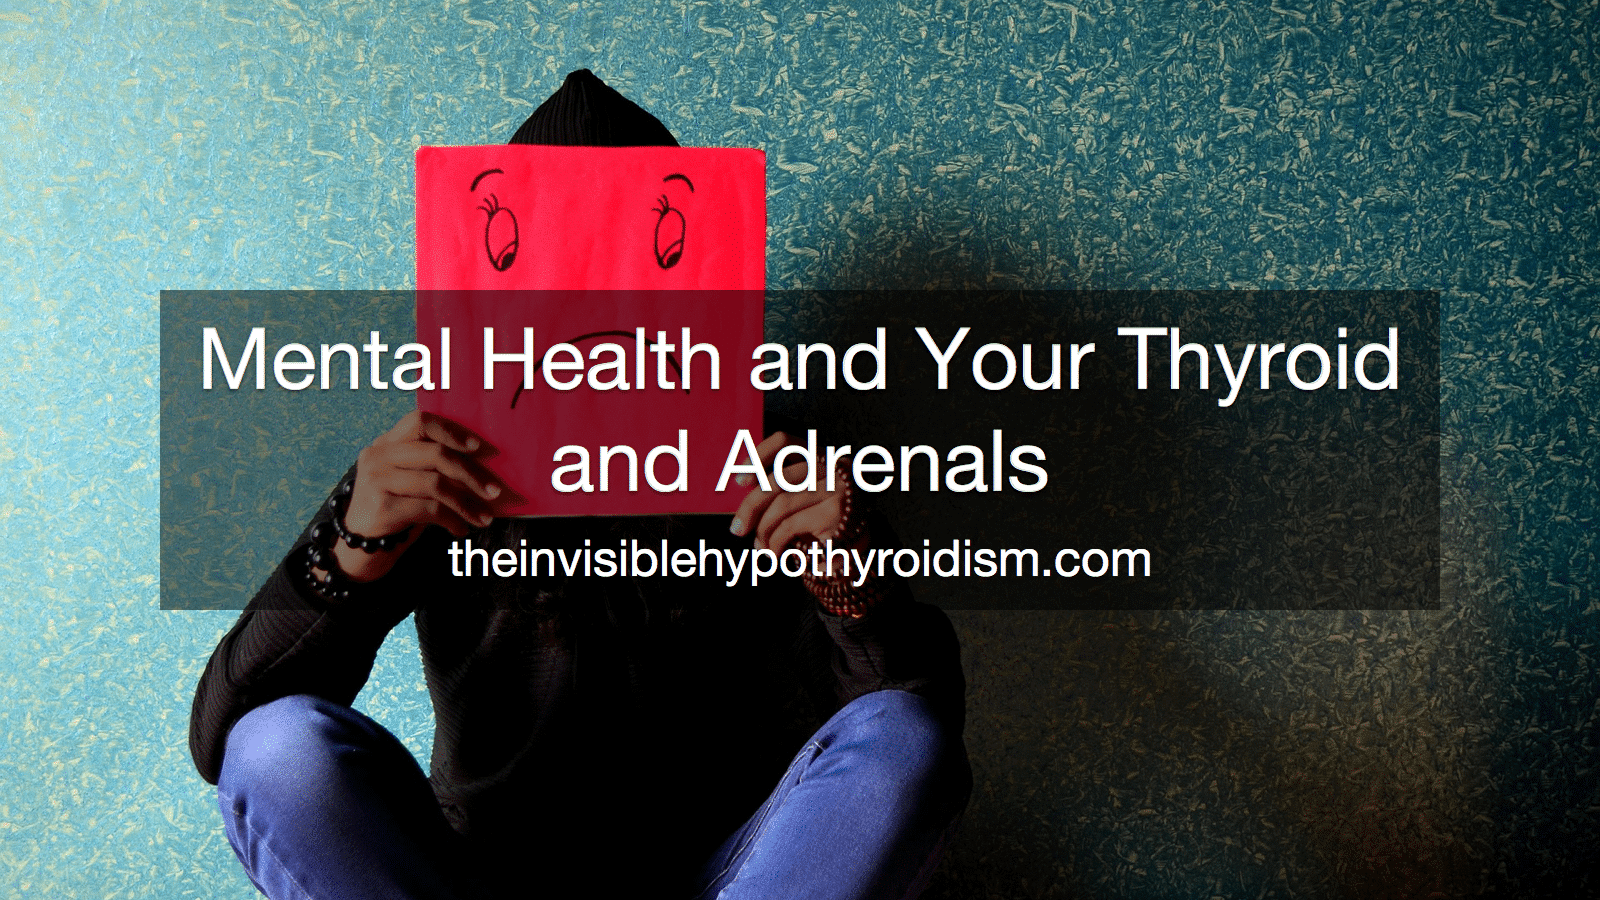 Mental Health and Your Thyroid and Adrenals